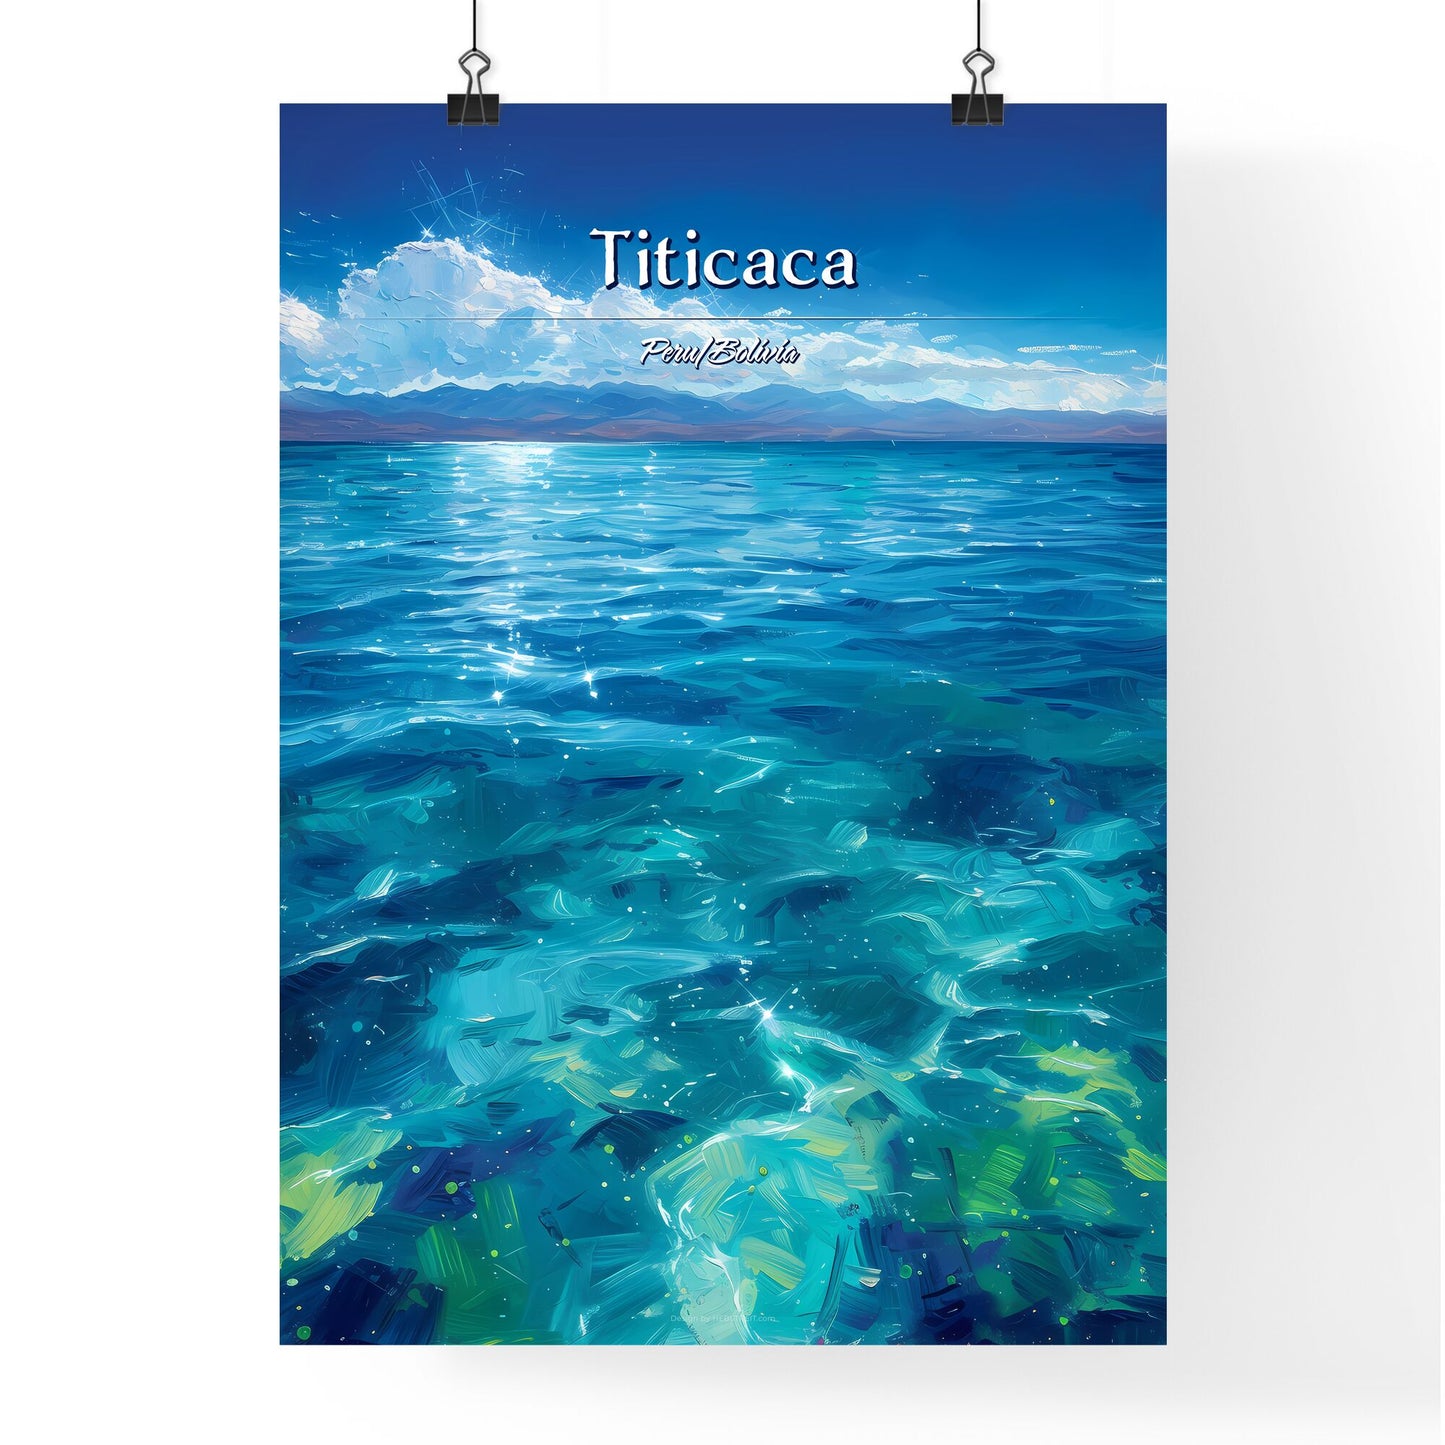 Titicaca, Peru/Bolivia - Art print of a blue water with mountains in the background Default Title